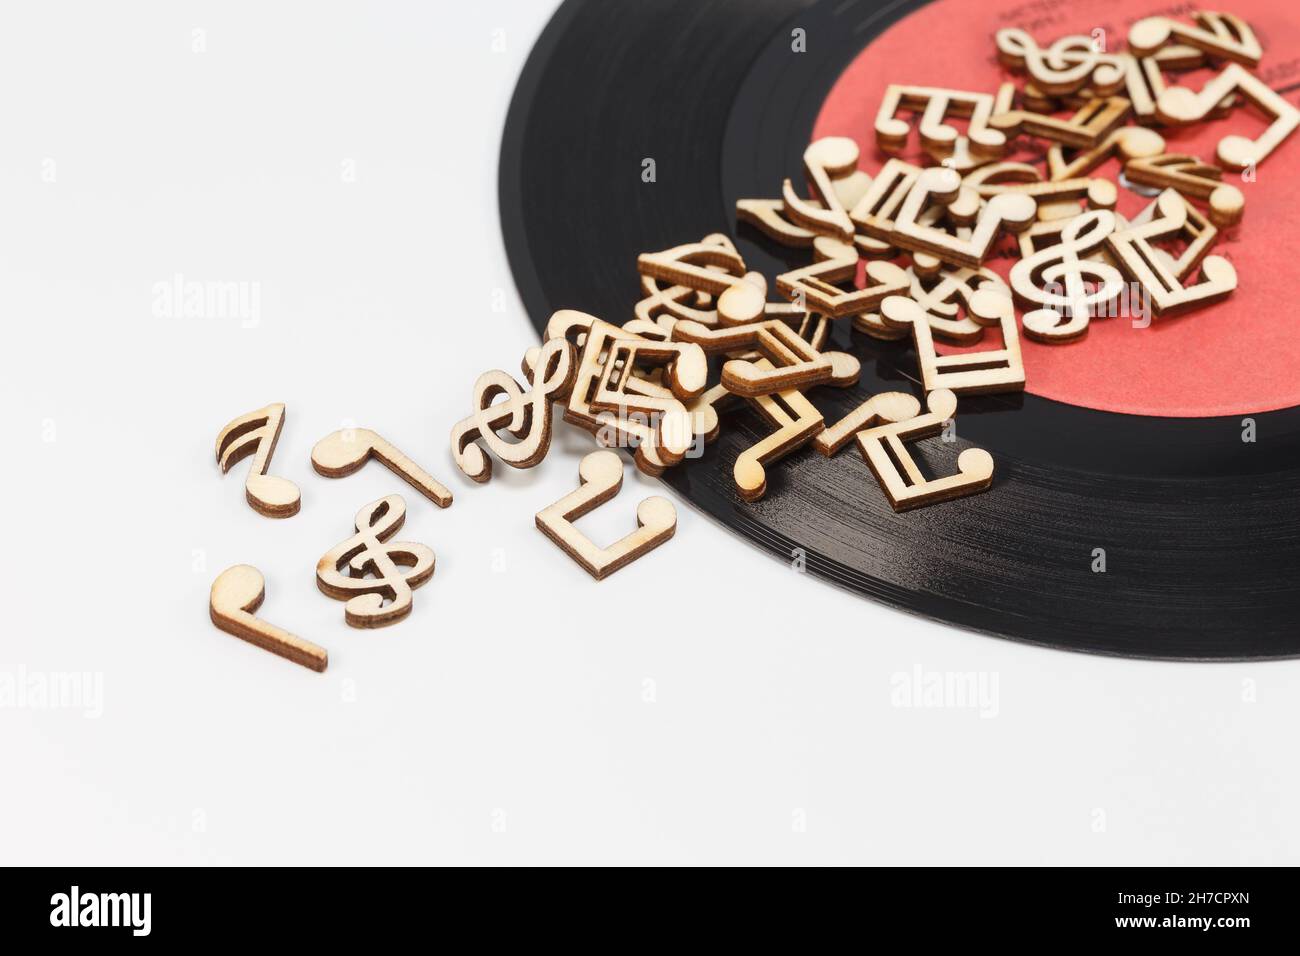 Wooden musical notes scattered on a vinyl record, on a white background Stock Photo